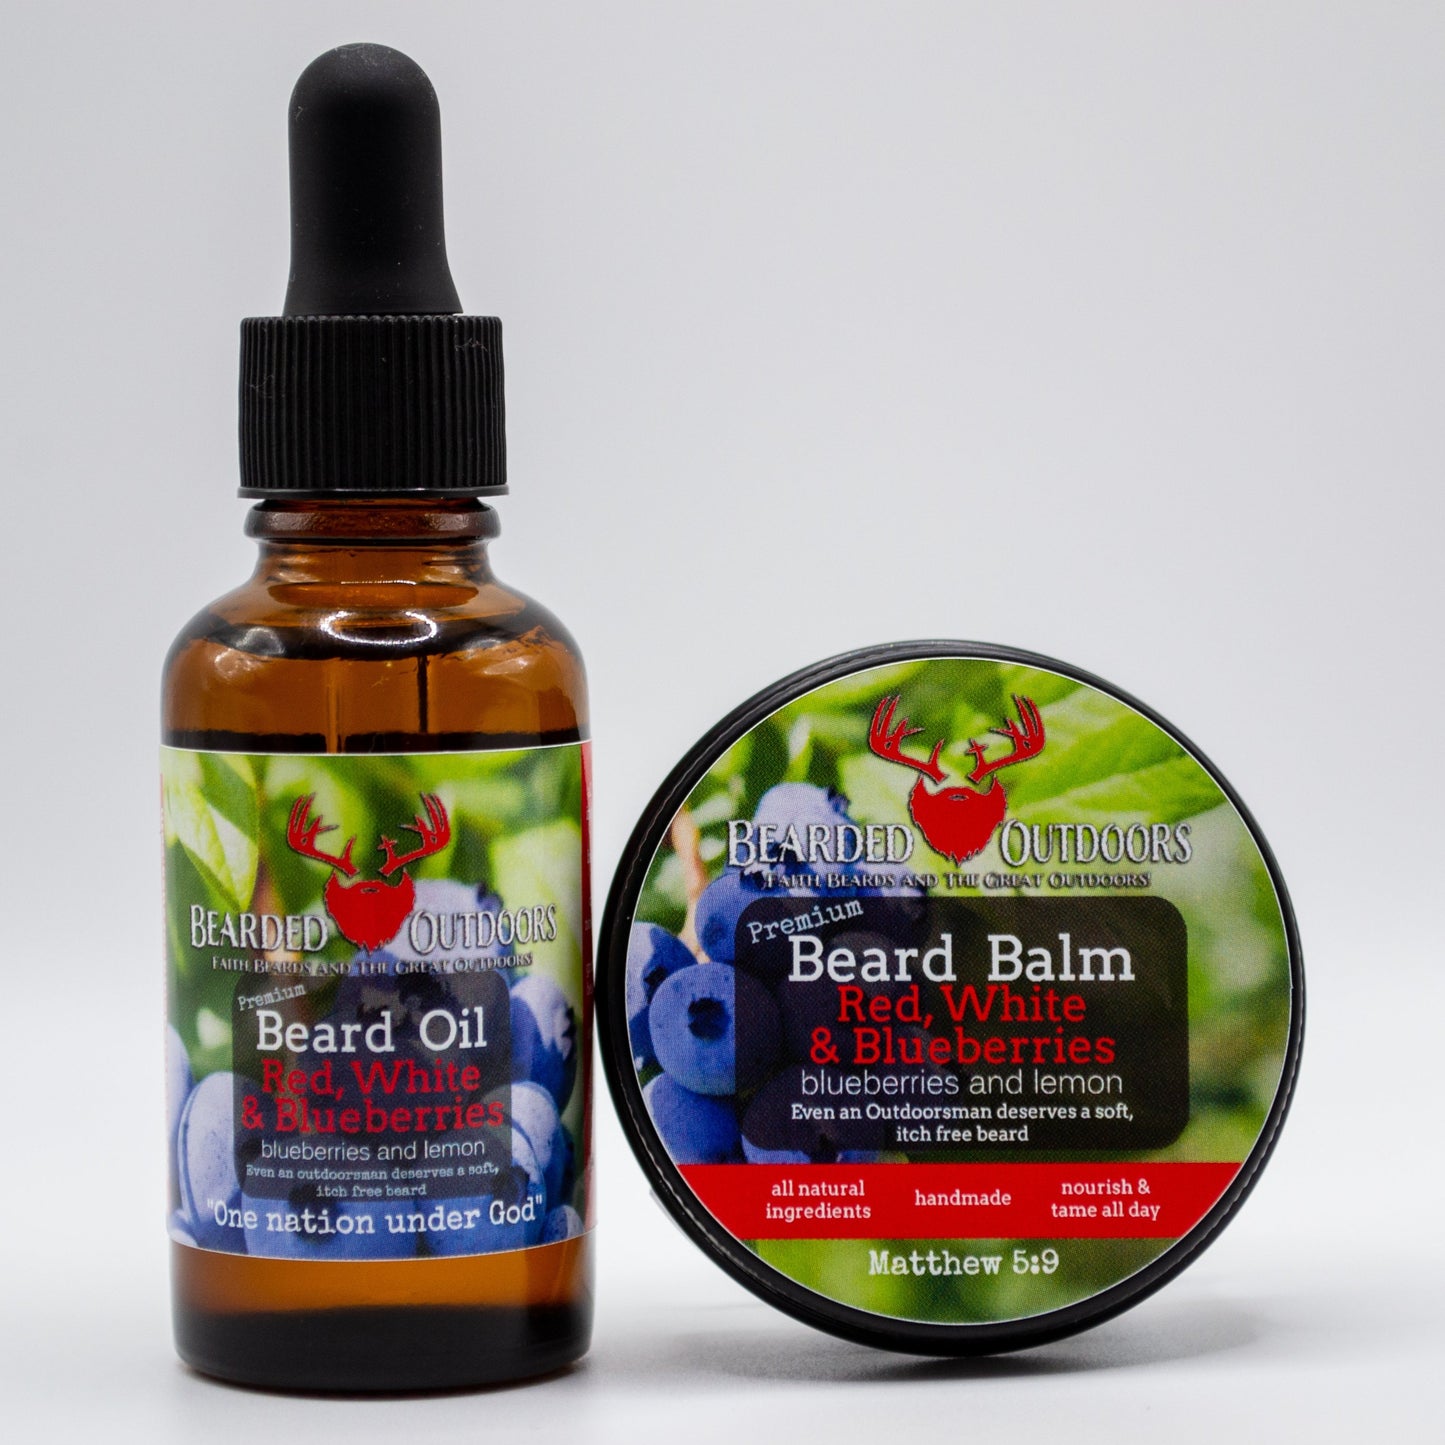 Bearded Outdoors Red, White and Blueberries (Blueberry and Lemon Scent) Premium Beard Oil and Beard Balm Combo